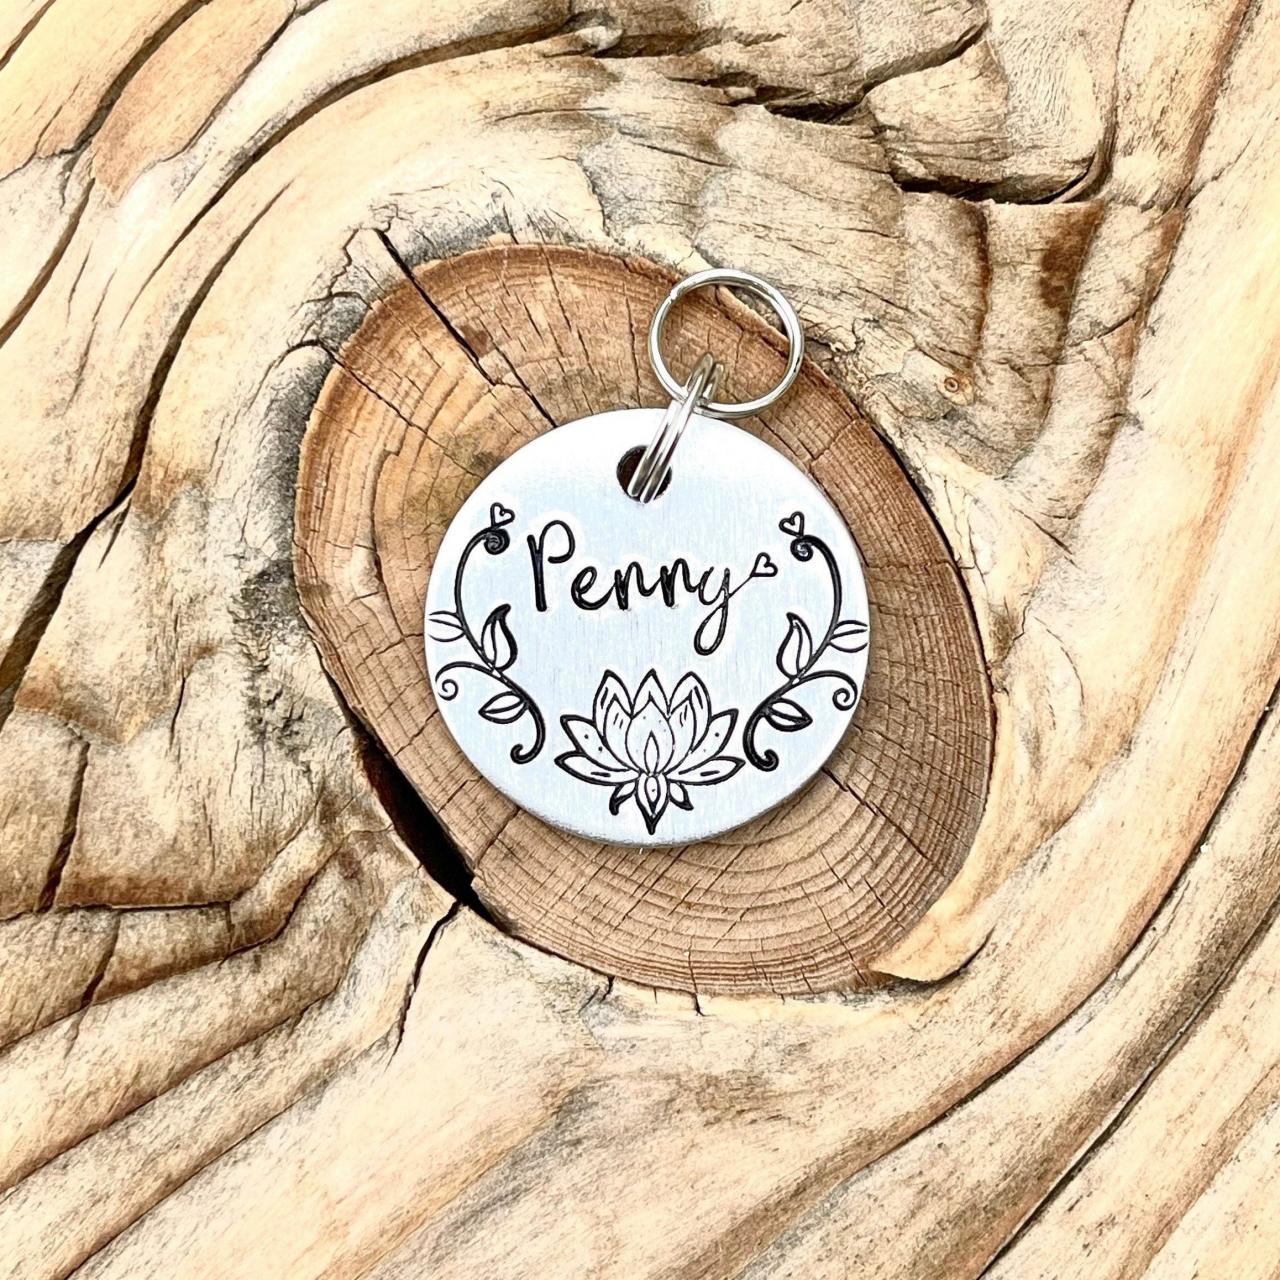 Pet name ID tag, horse tag, hand stamped dog tag, stamped metal,Light Weight, Aluminum, Personalized dog tag, custom dog tag